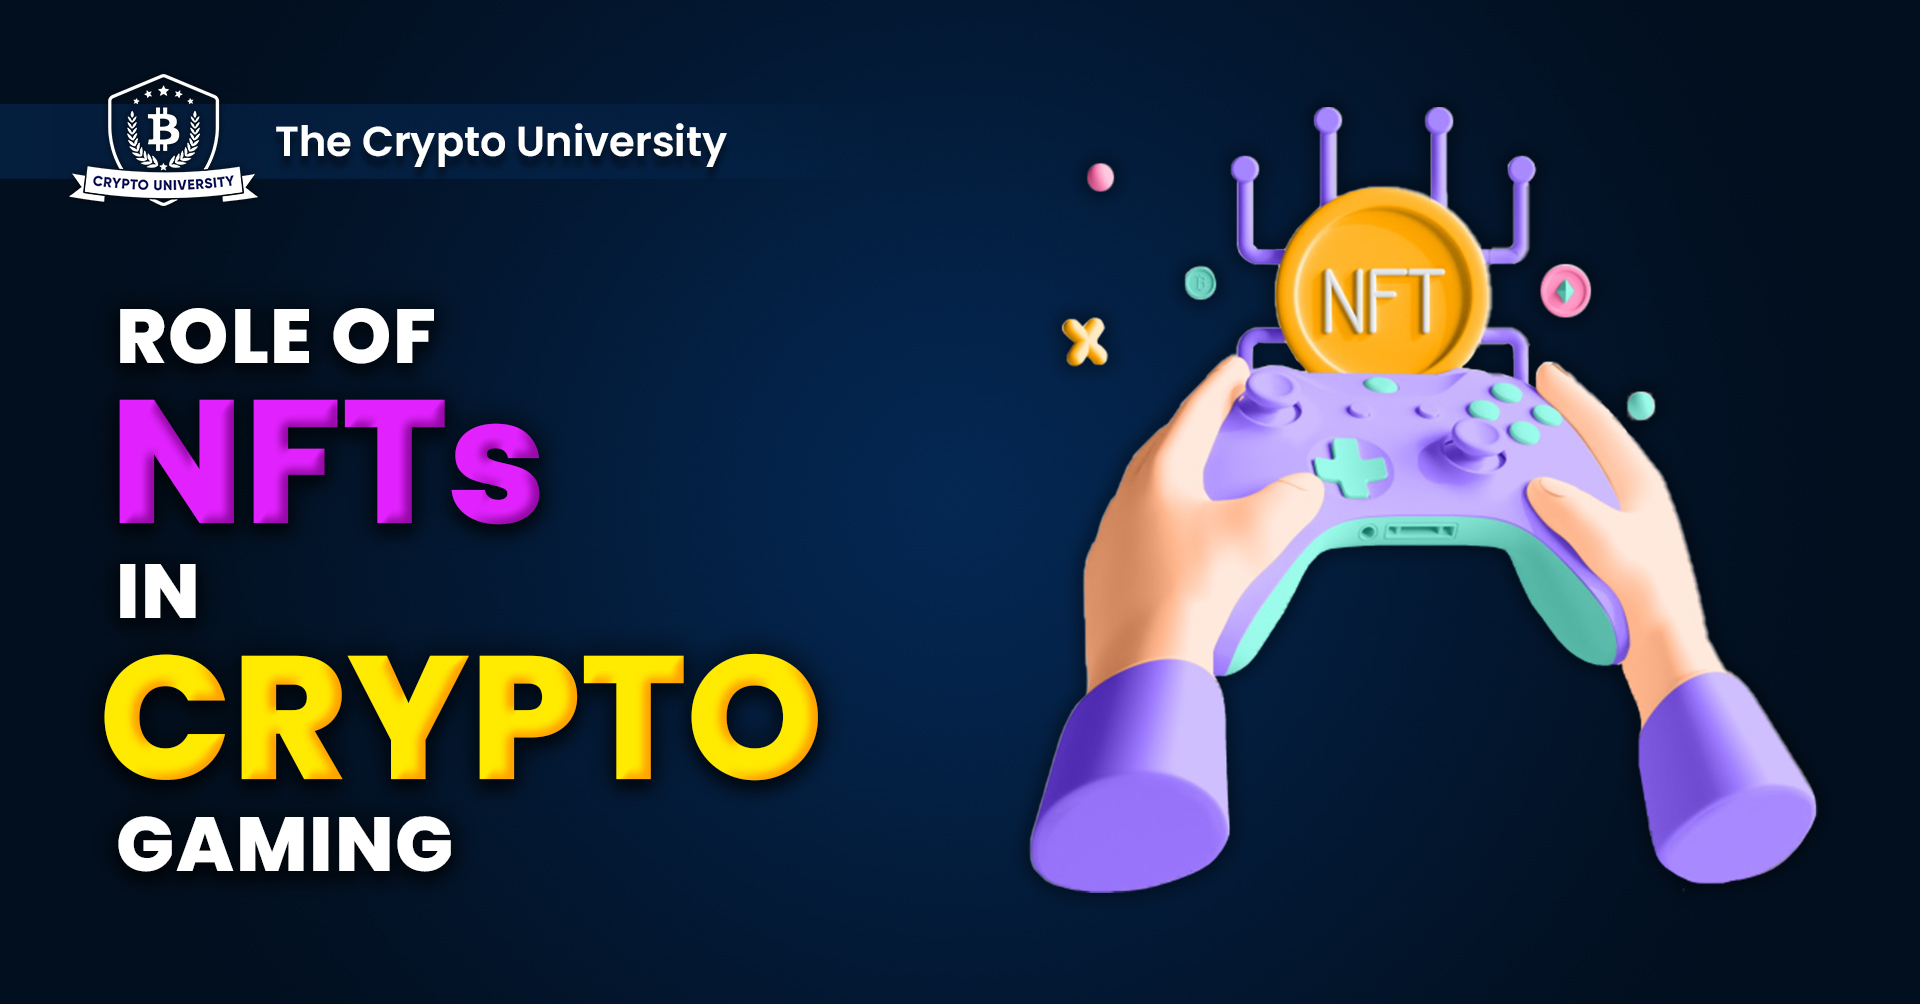 A featured image for a post on the role of NFTs in Crypto gaming